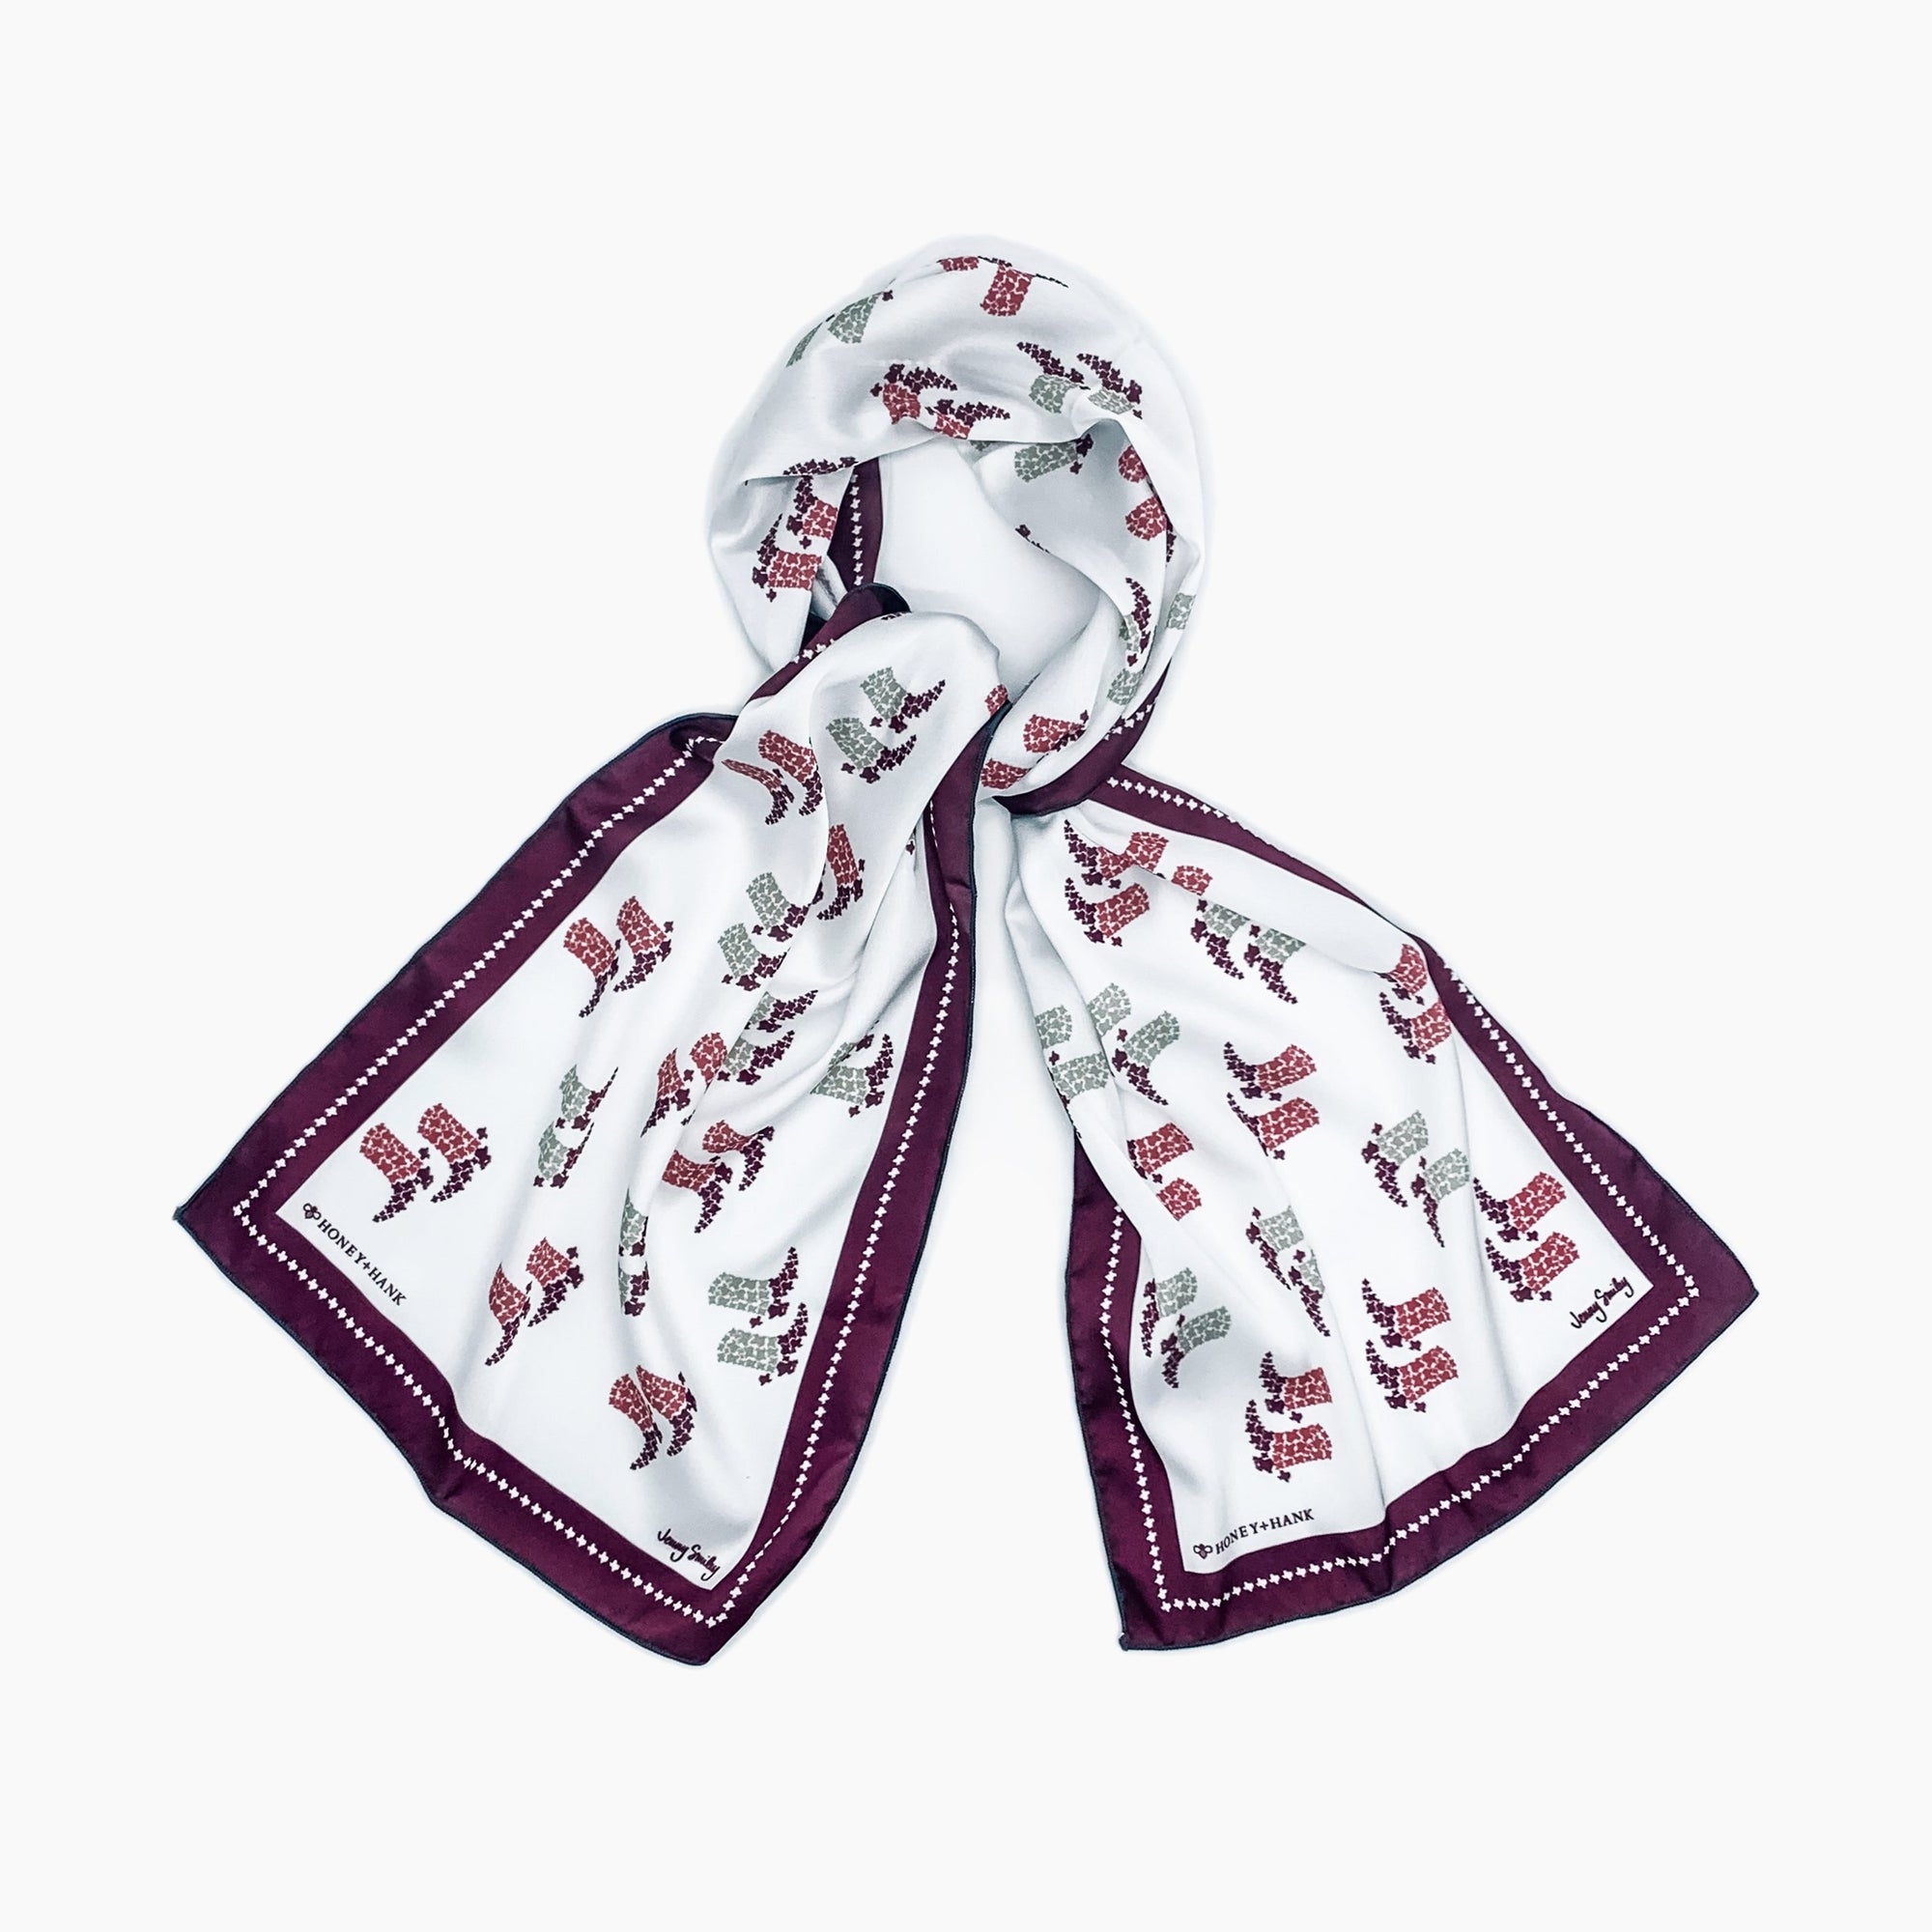 This versatile Texas Boots Scarf in Maroon, with hidden state icons, can be worn so many ways: around your neck, on your bag, in your hair, even tied into your boots on gameday!